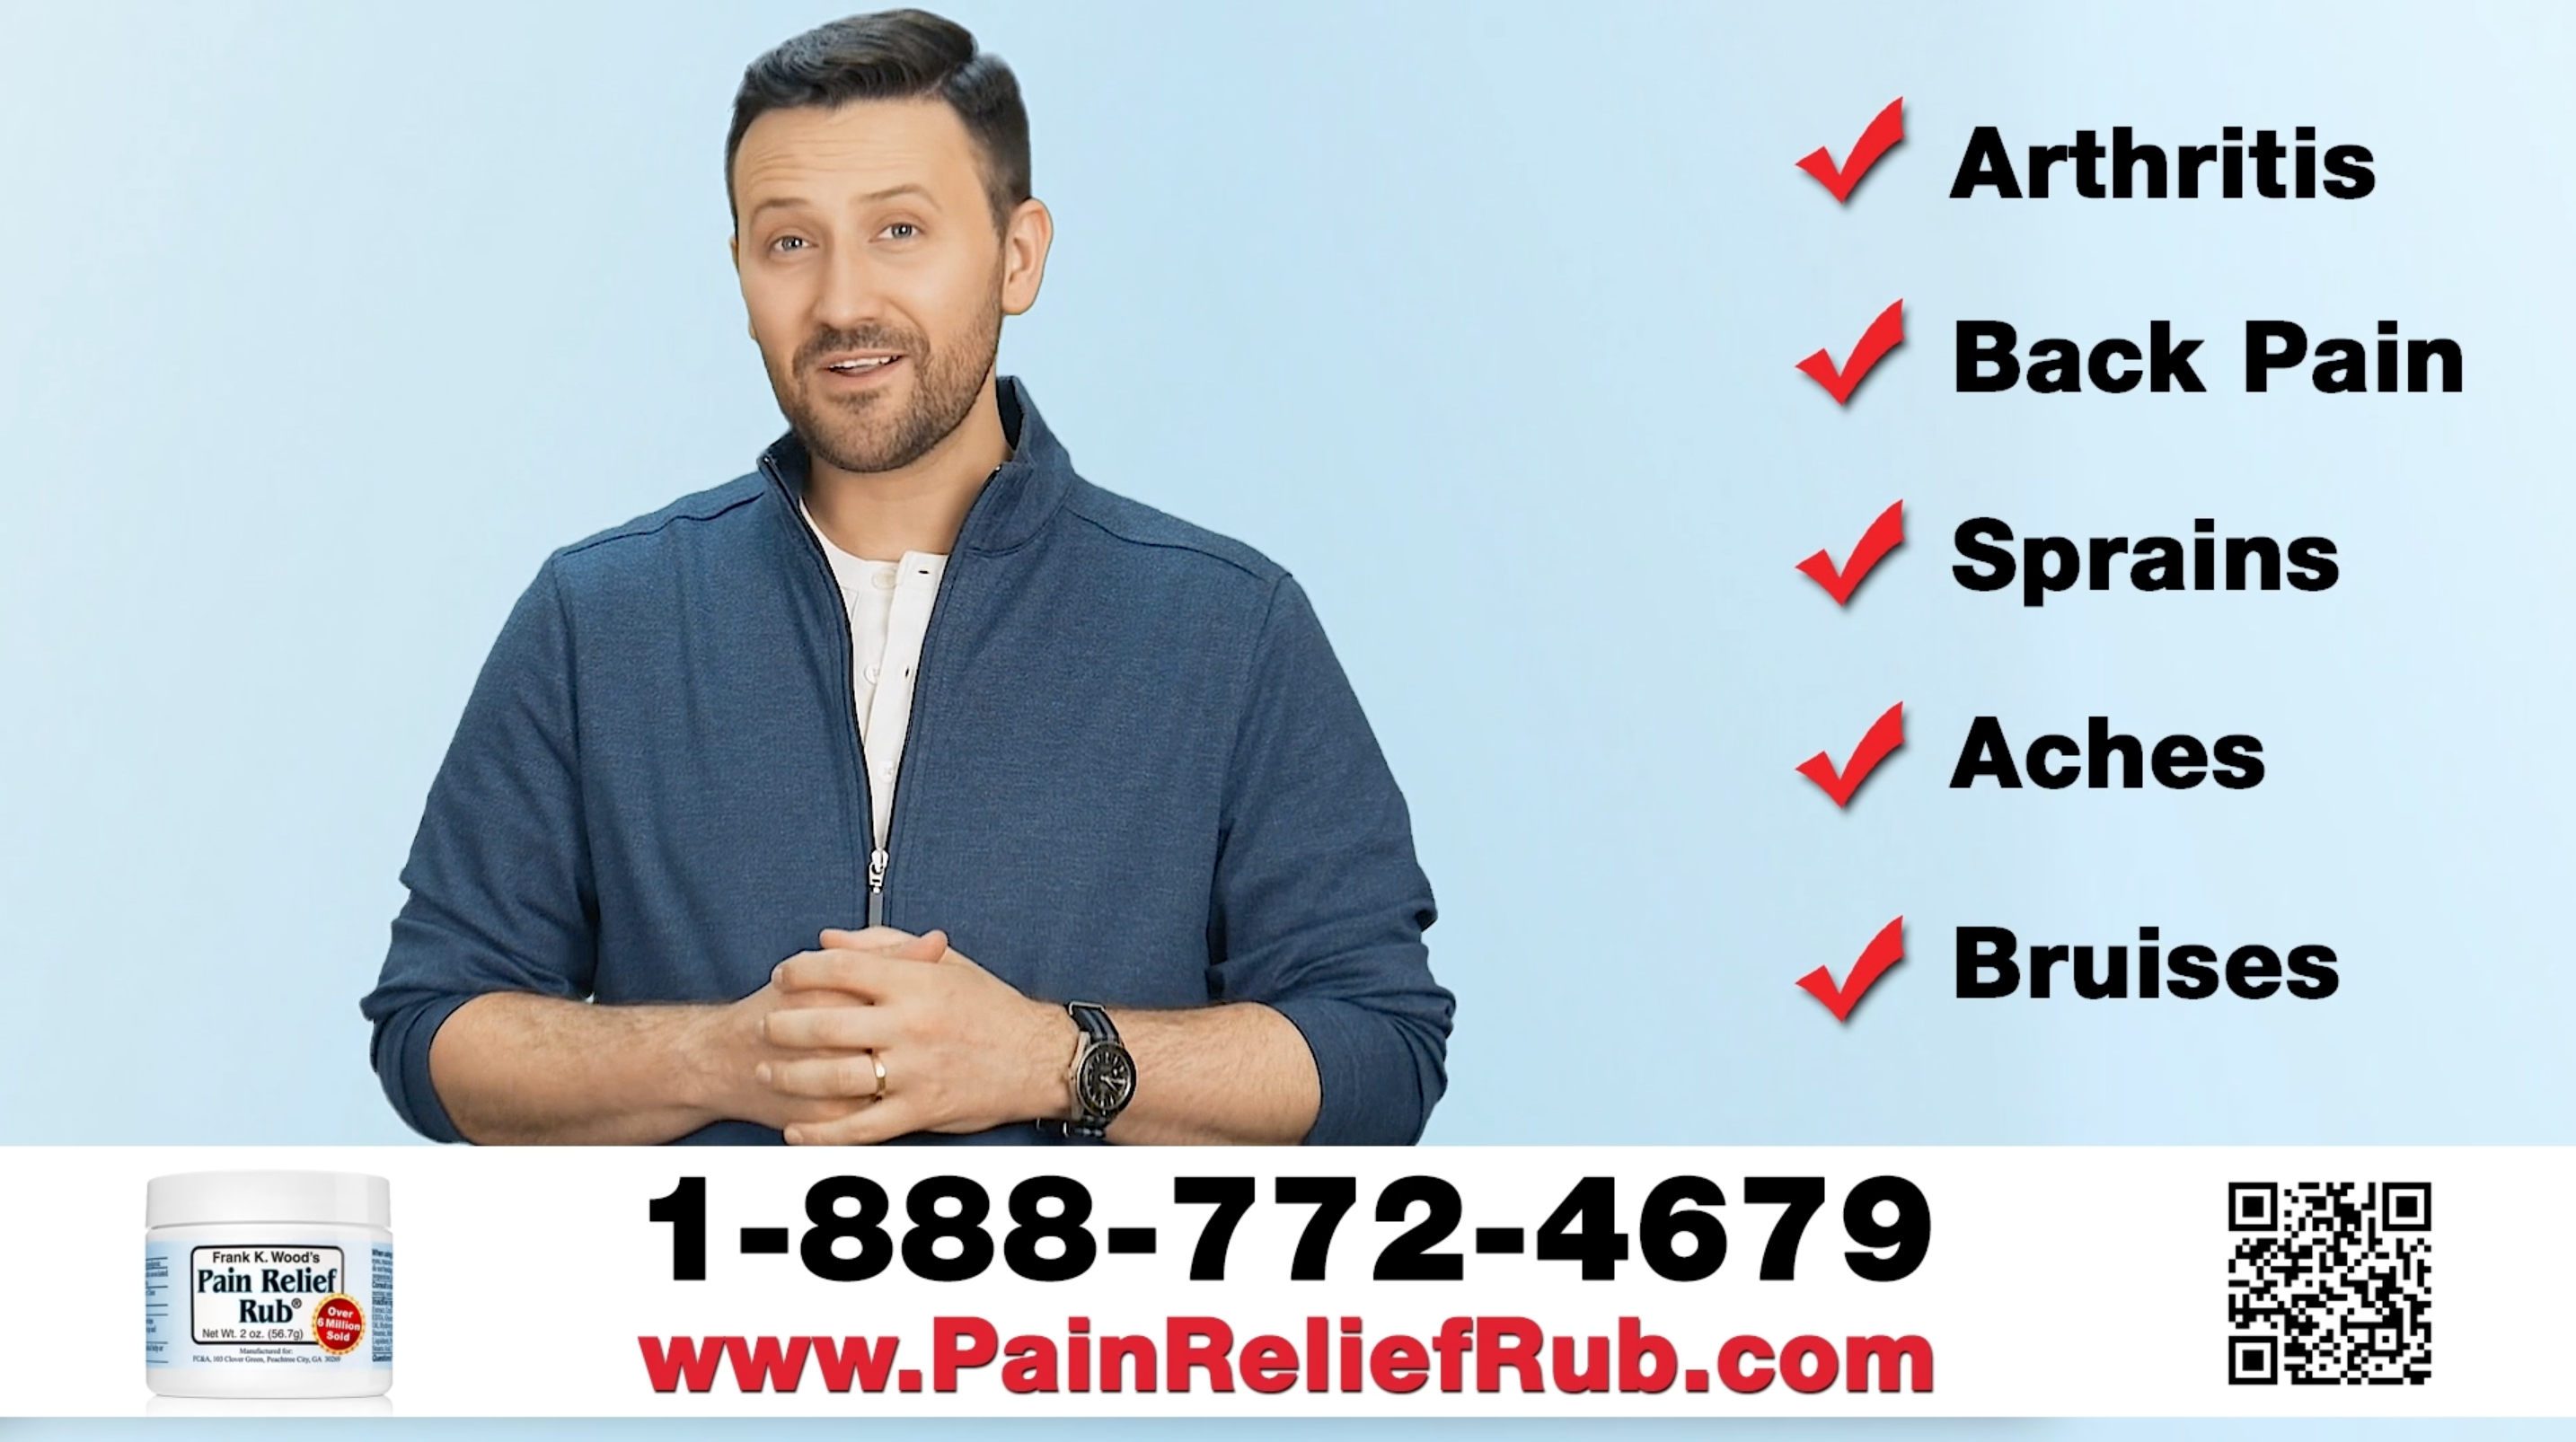 Load video: Pain Relief Rub 30 Second Video